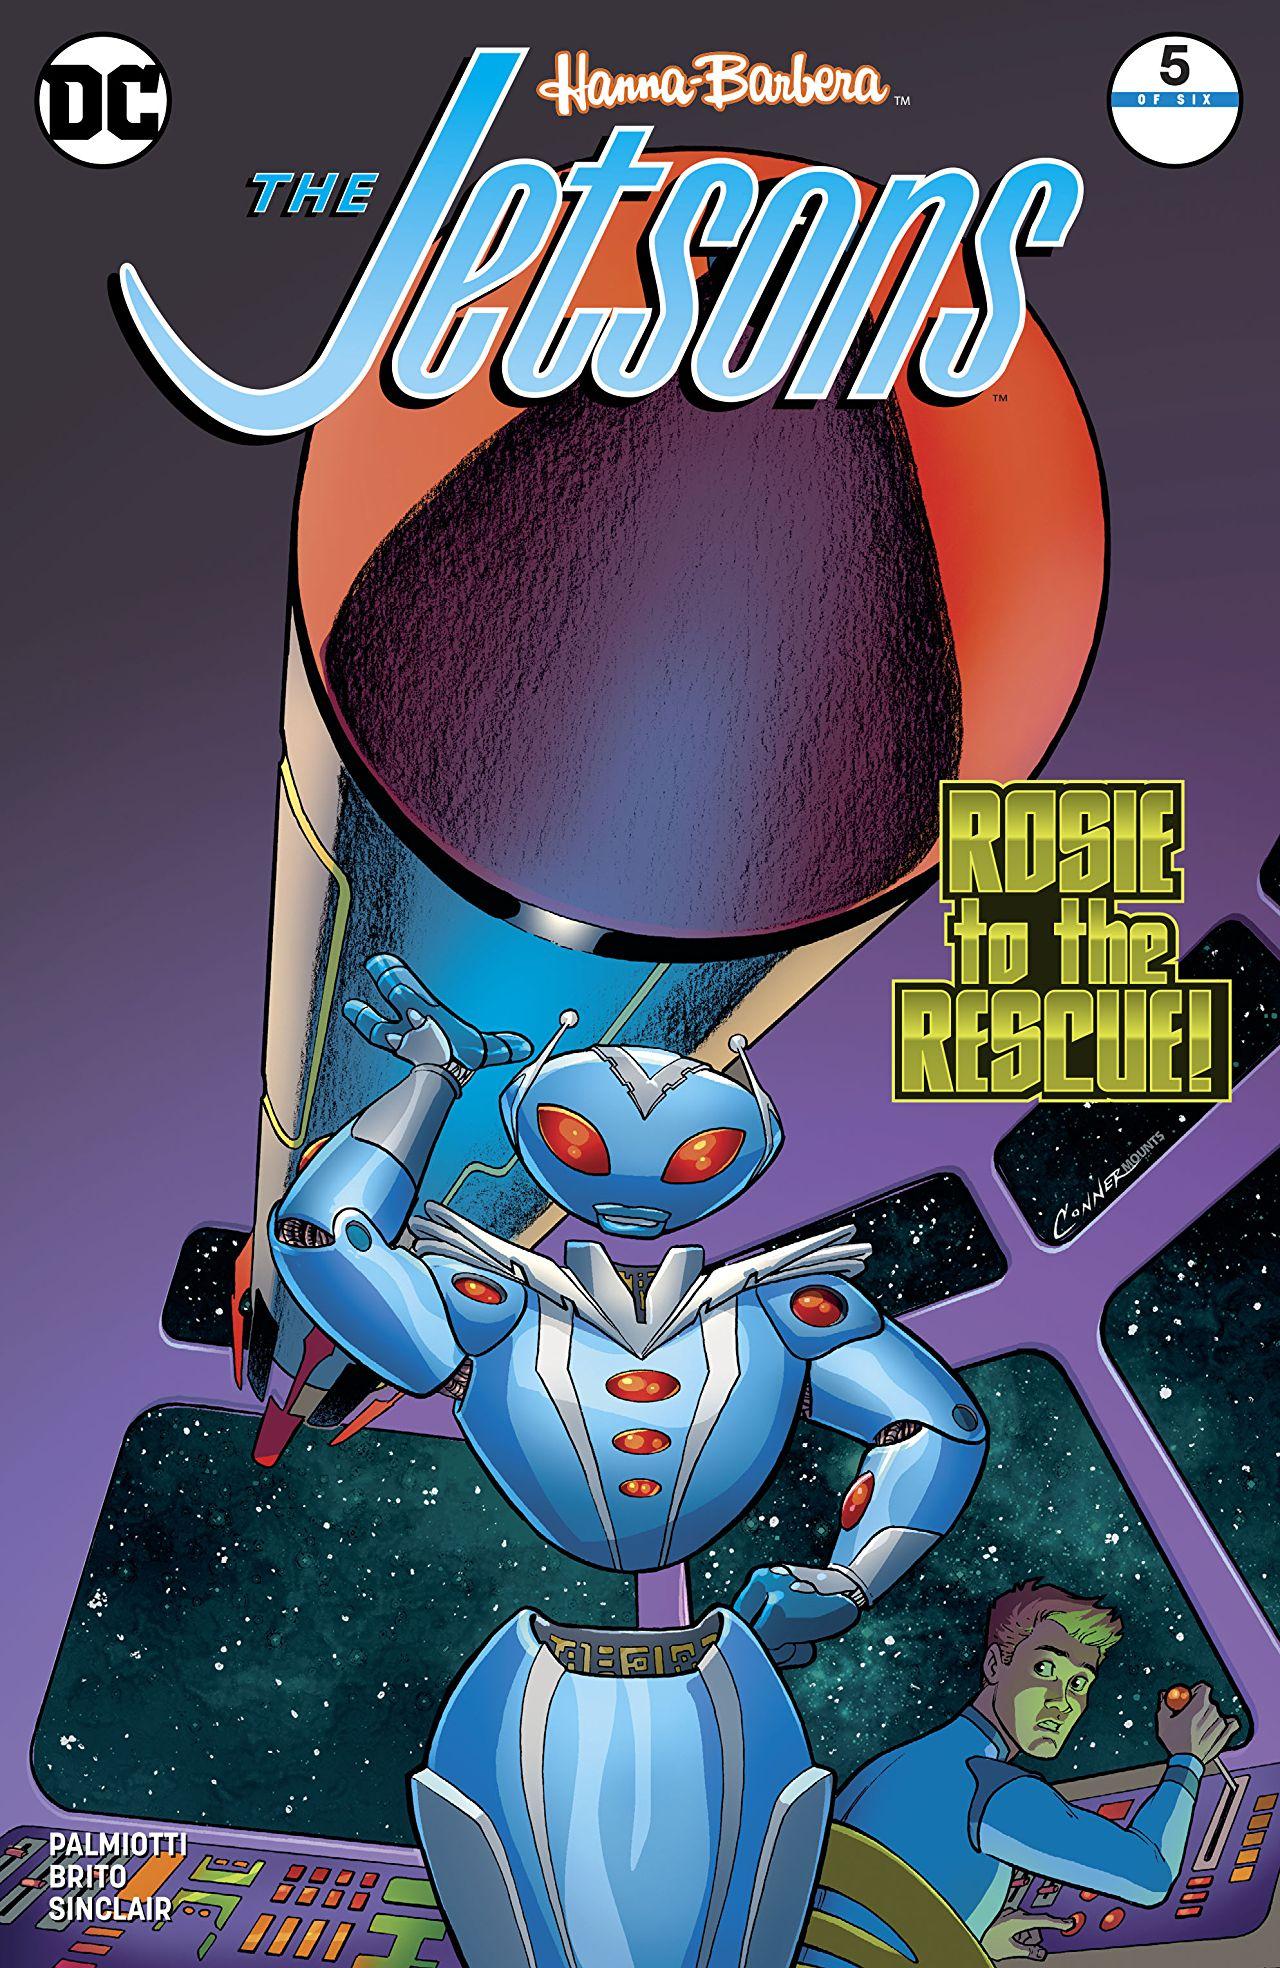 The Jetsons Vol. 1 #5